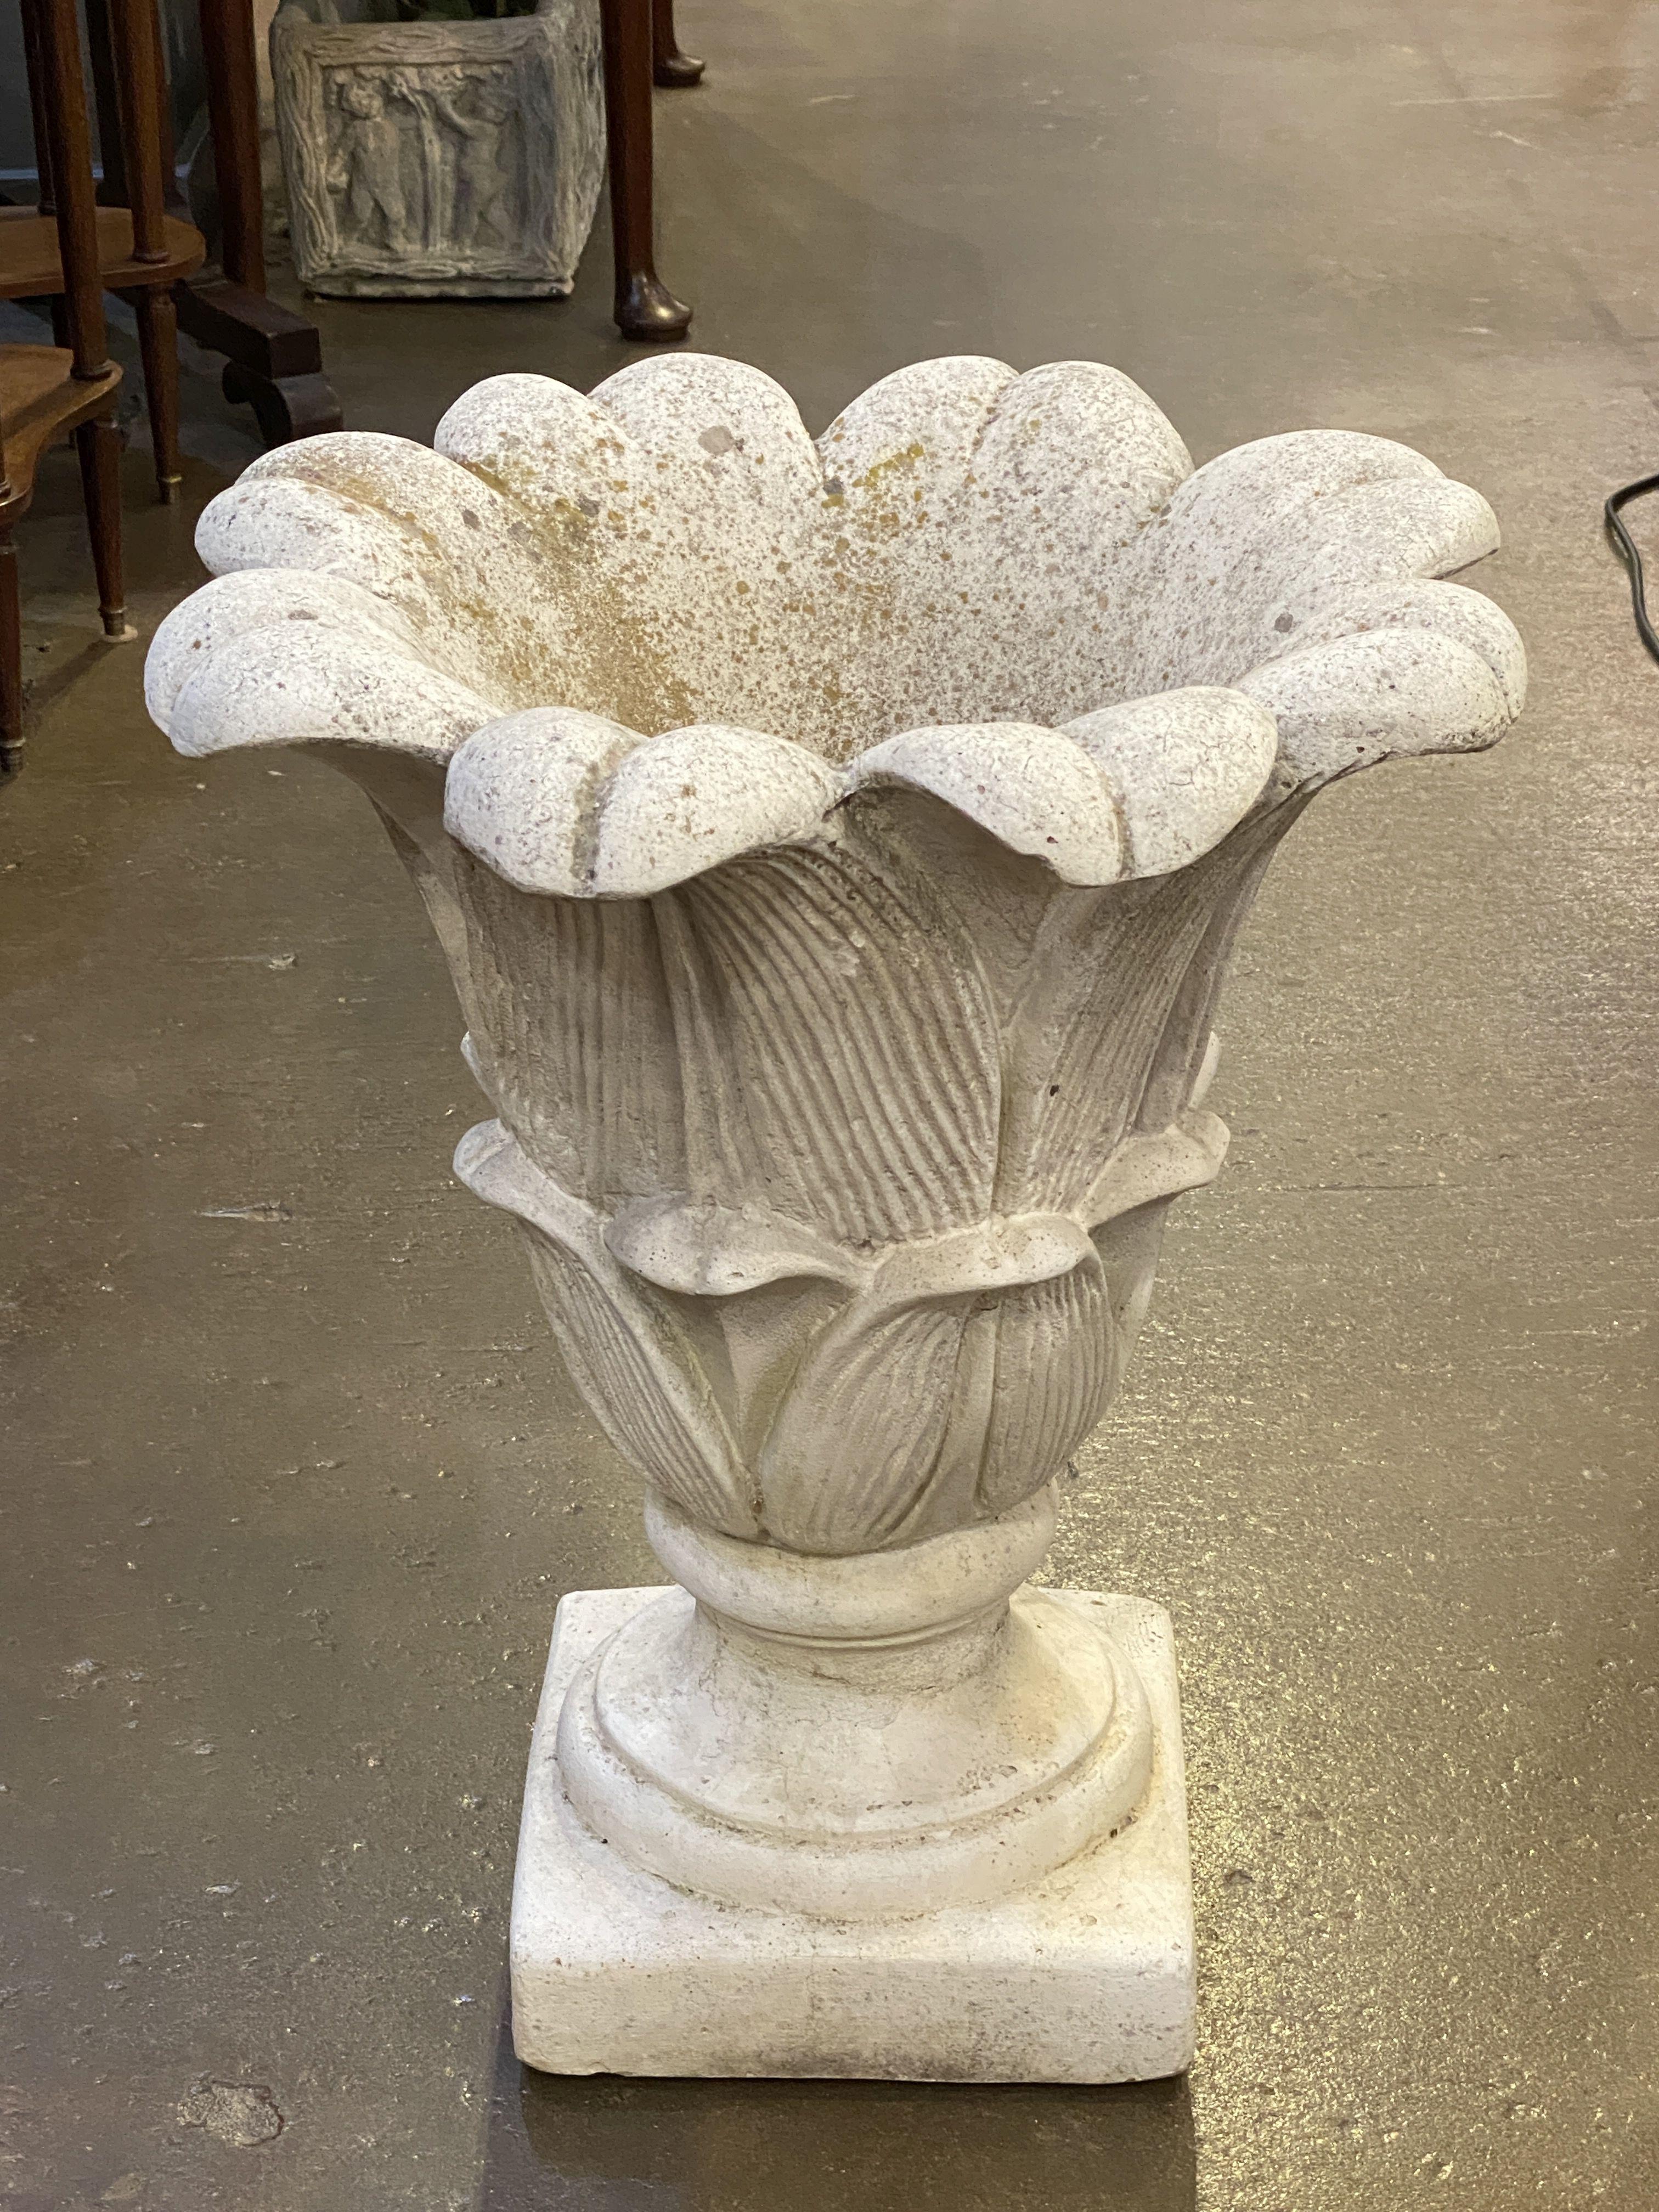 A fine Italian garden stone planter pot or urn on a raised square pedestal platform or plinth, featuring a relief design of a lotus flower. Interior with optional or removable iron collar.

Dimensions are H 23 inches x Diameter 19 inches

Base